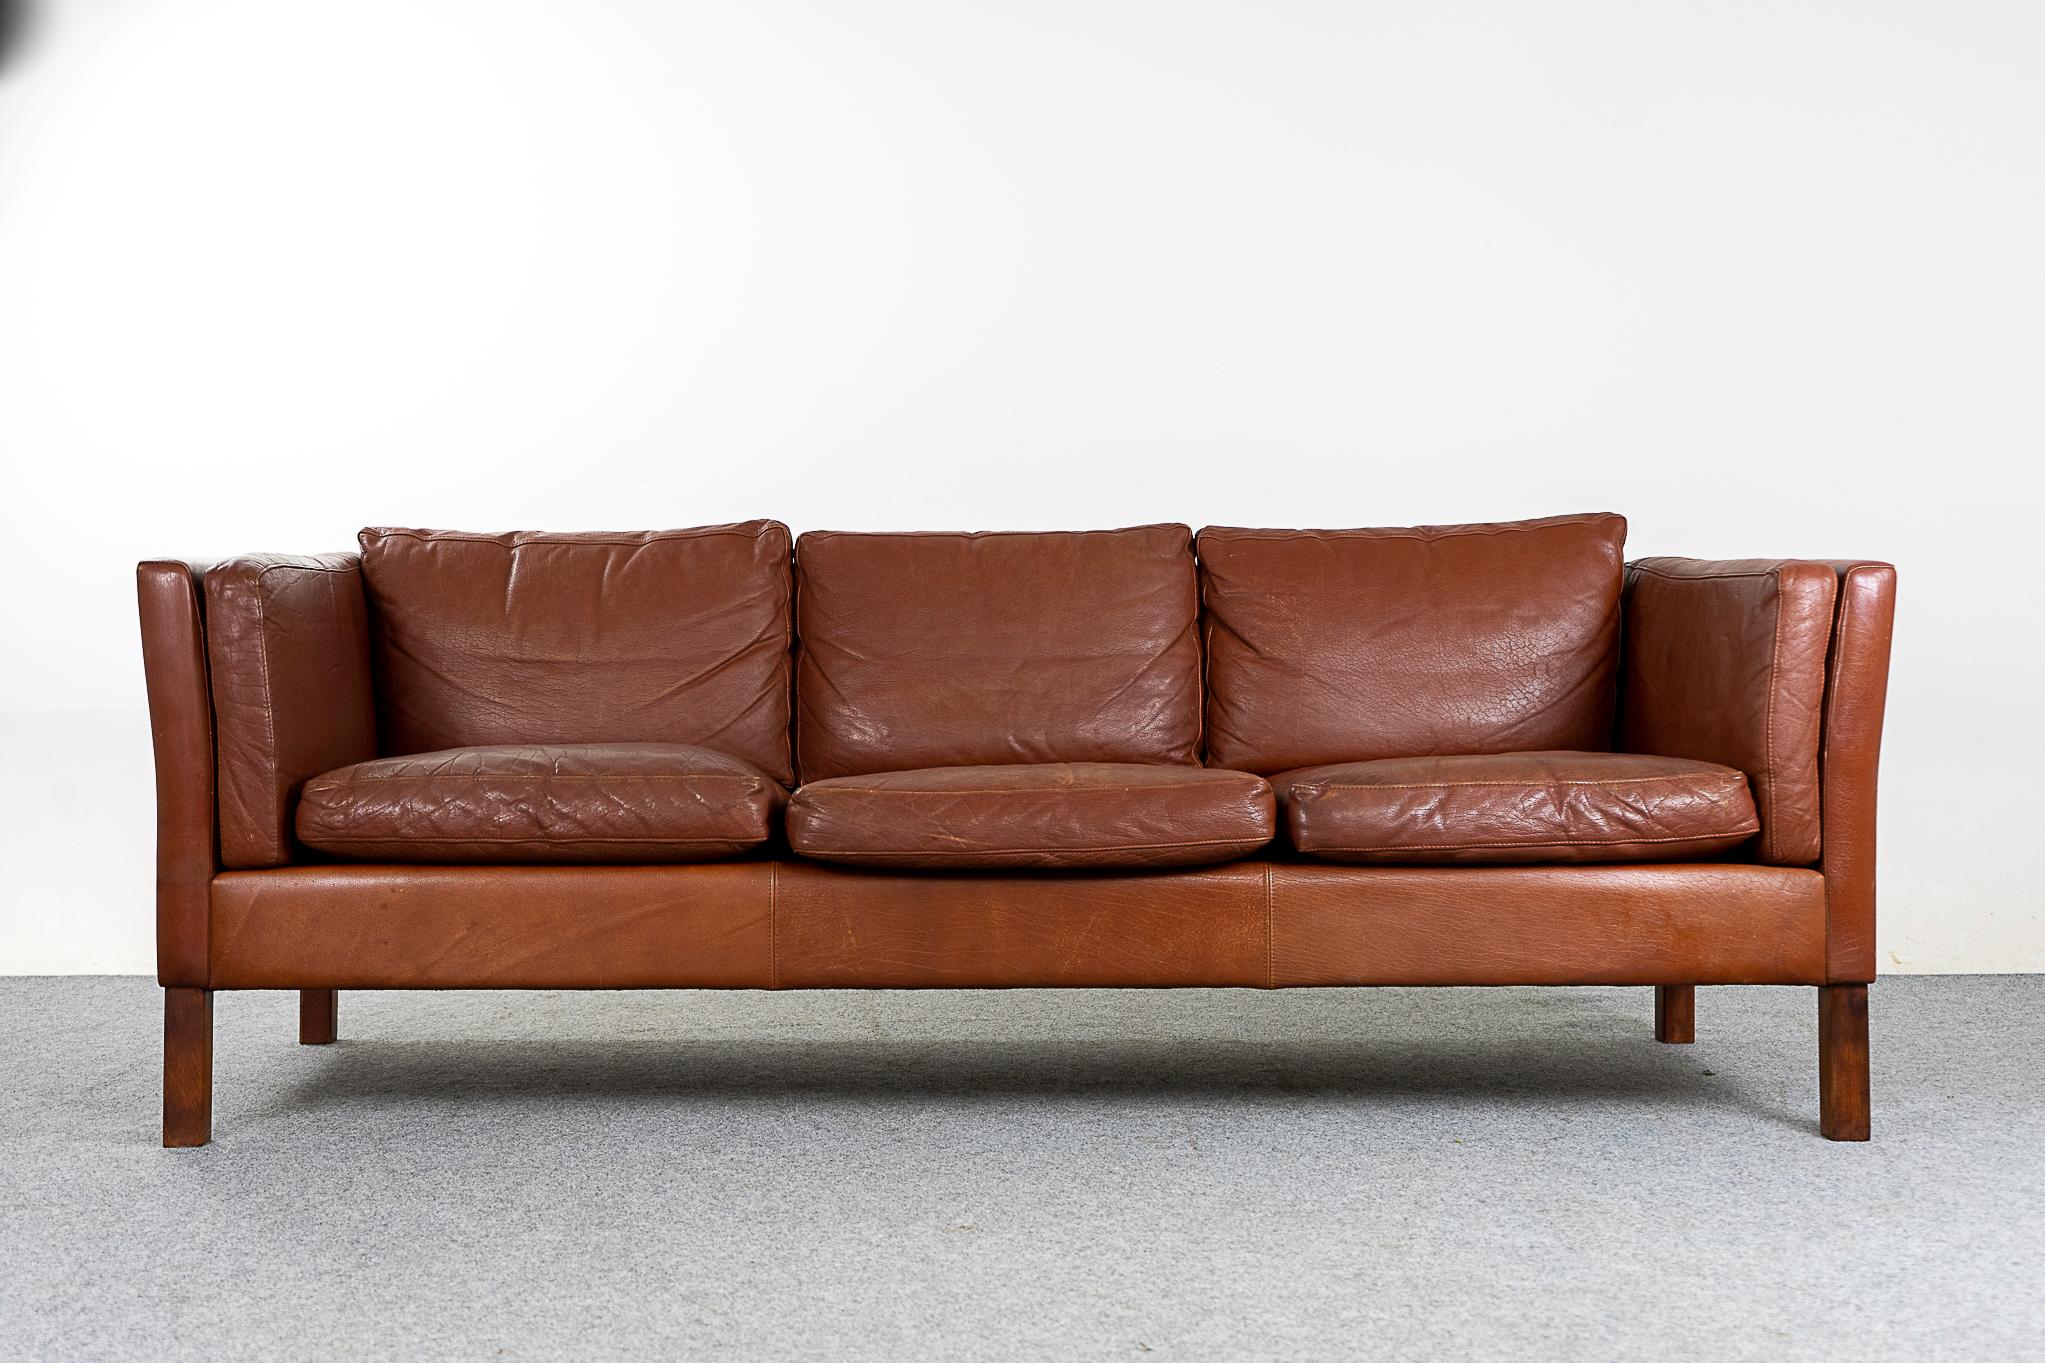 Leather mid-century sofa, circa 1960's. Original leather is soft and supple while also being durable to ensure years of use and enjoyment. Seats have some staining.

Please inquire for remote and international shipping rates.